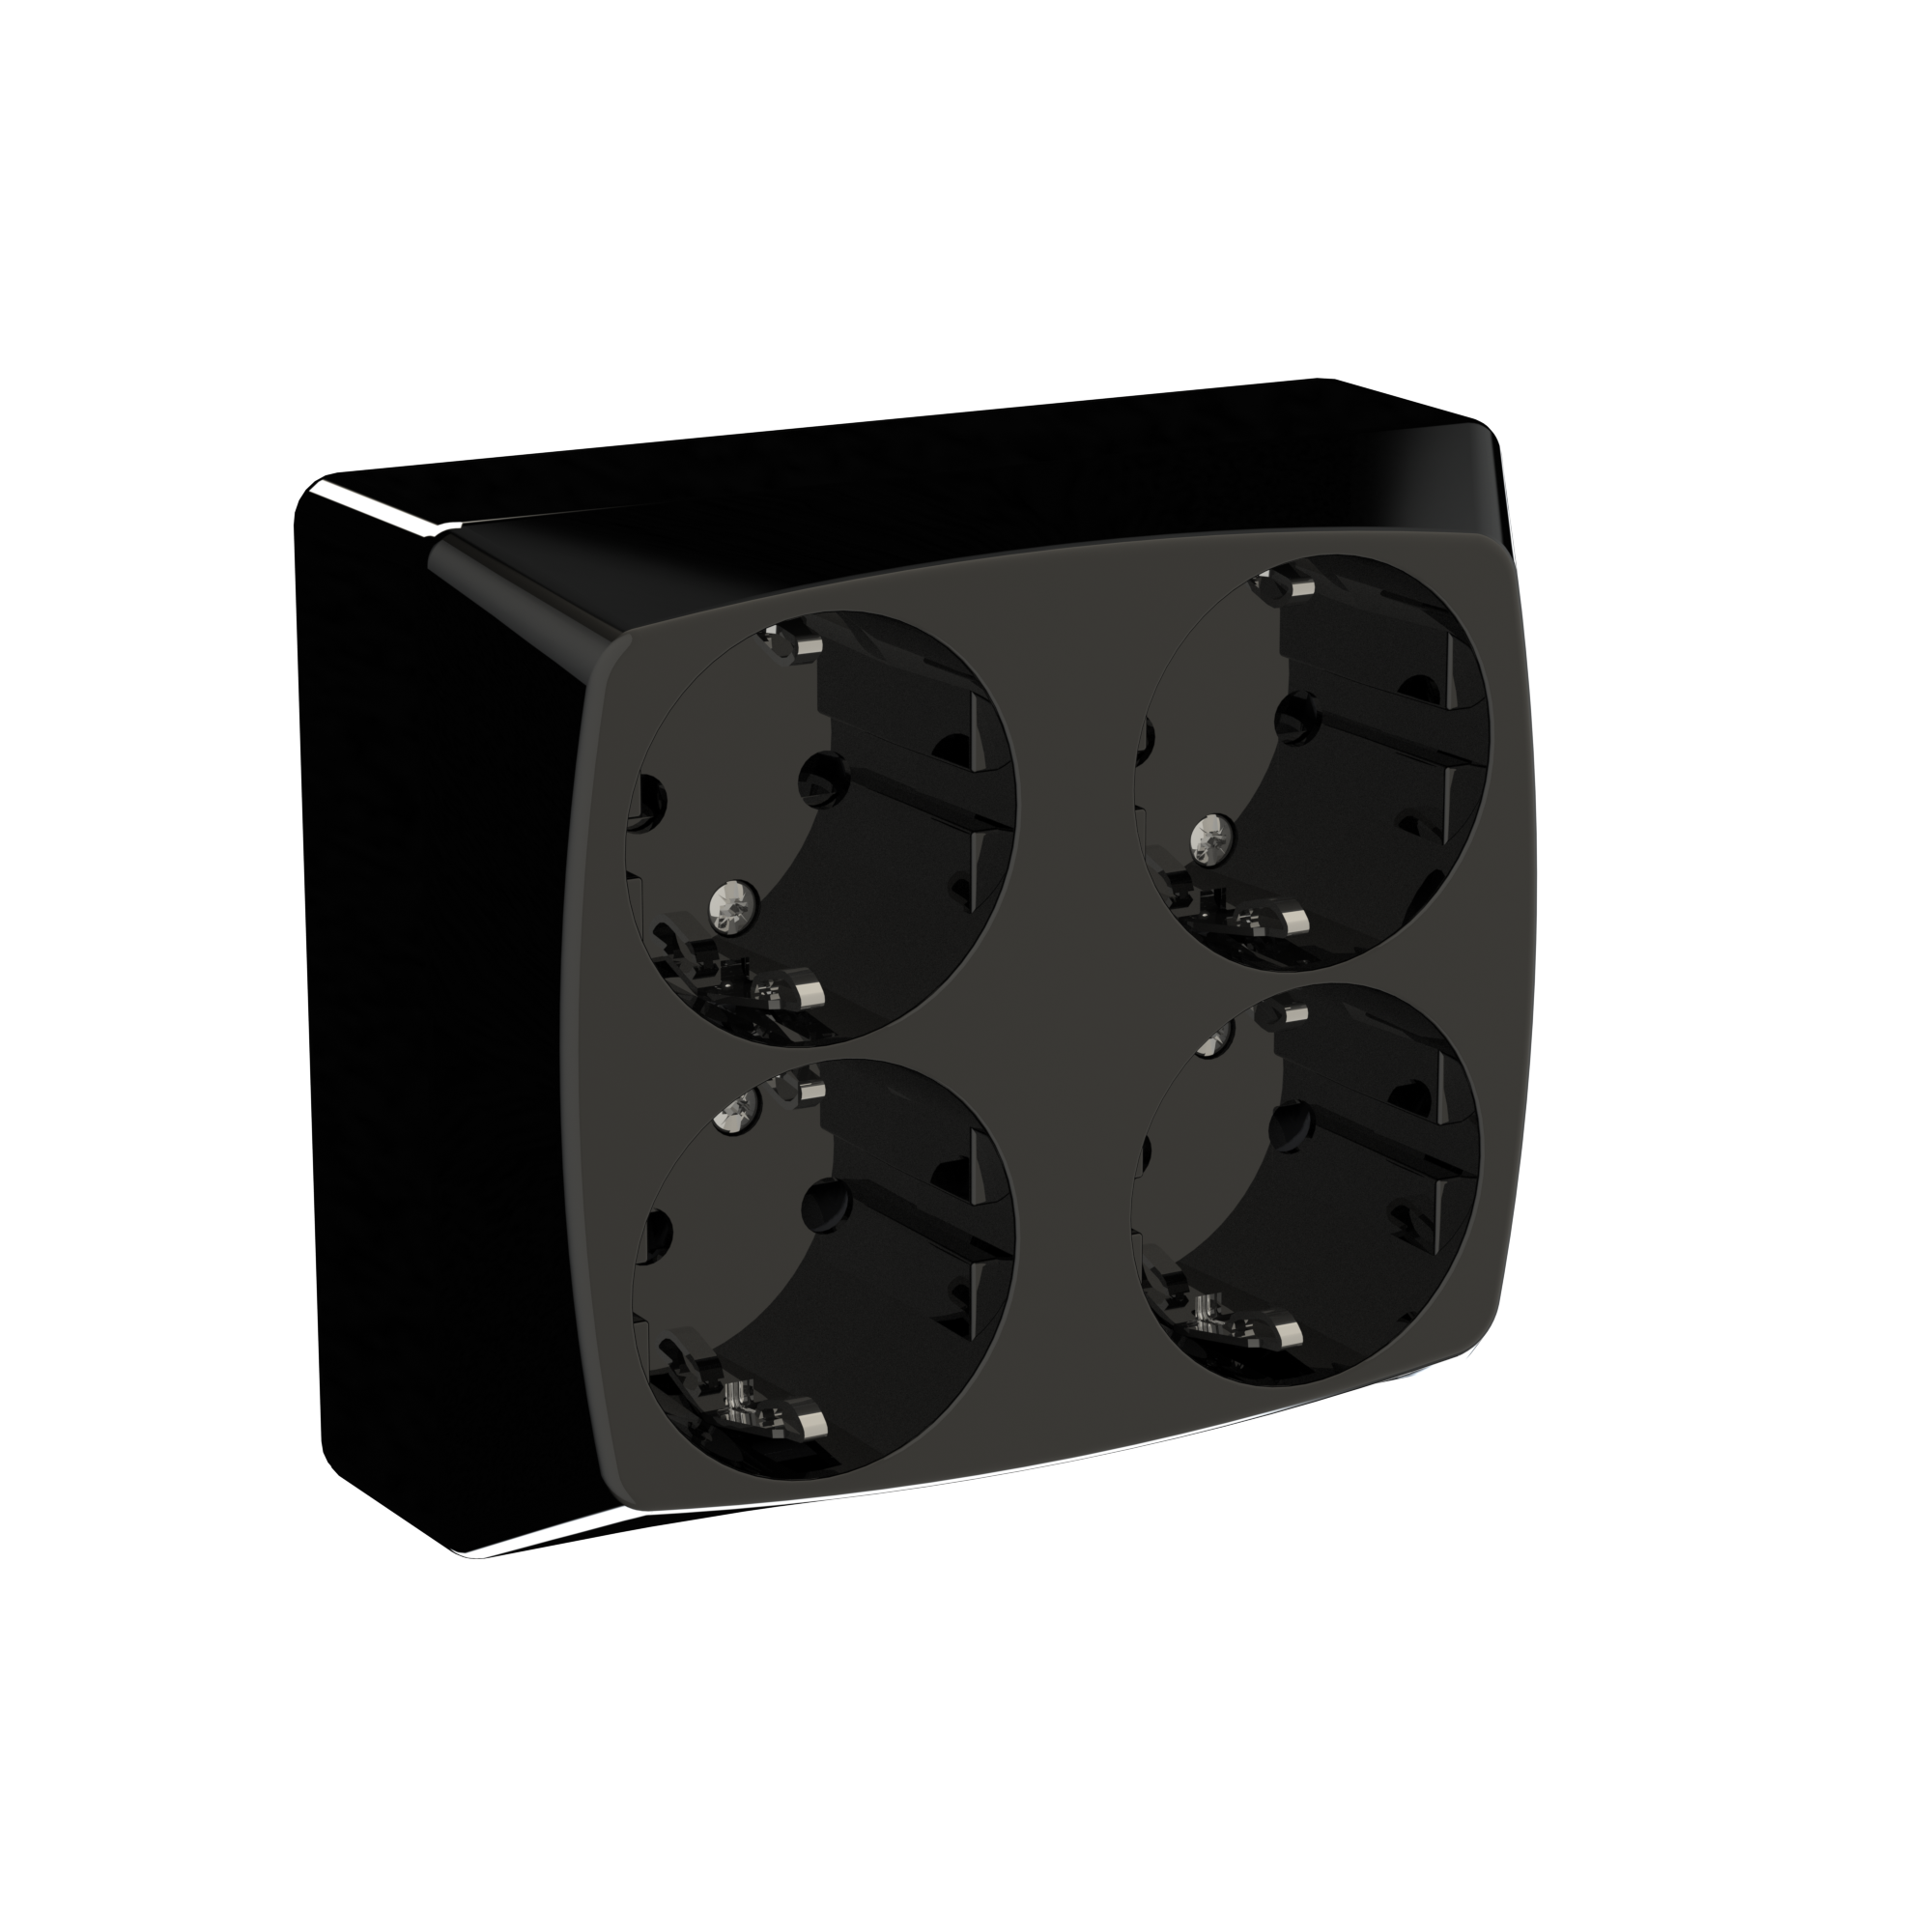 Surface-type wall socket outlet for fixed installation , screwless terminal ETM241PQV5